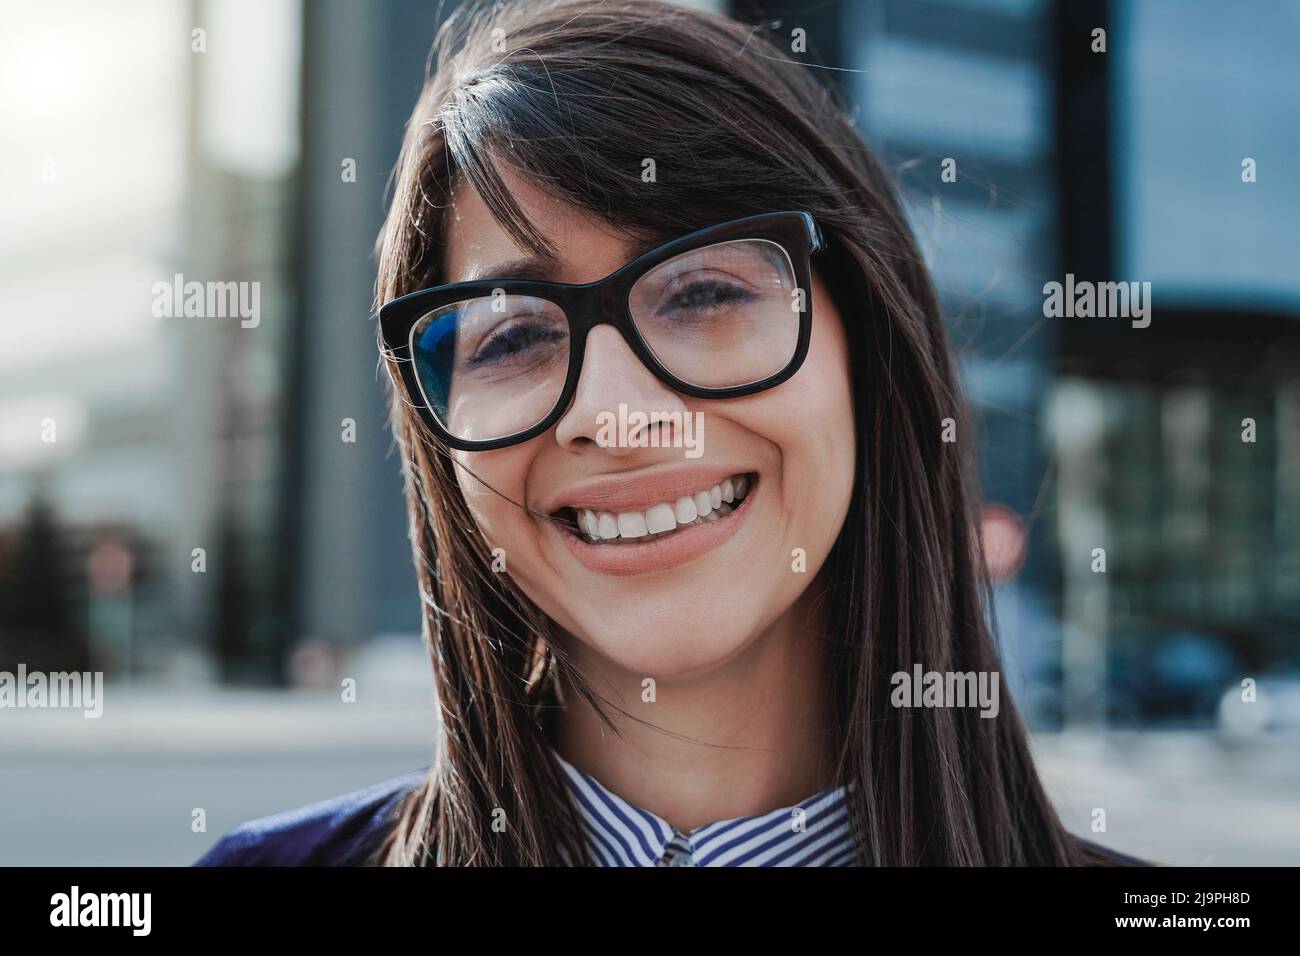 Young business woman working outside with office buildings on background - Focus on face Stock Photo